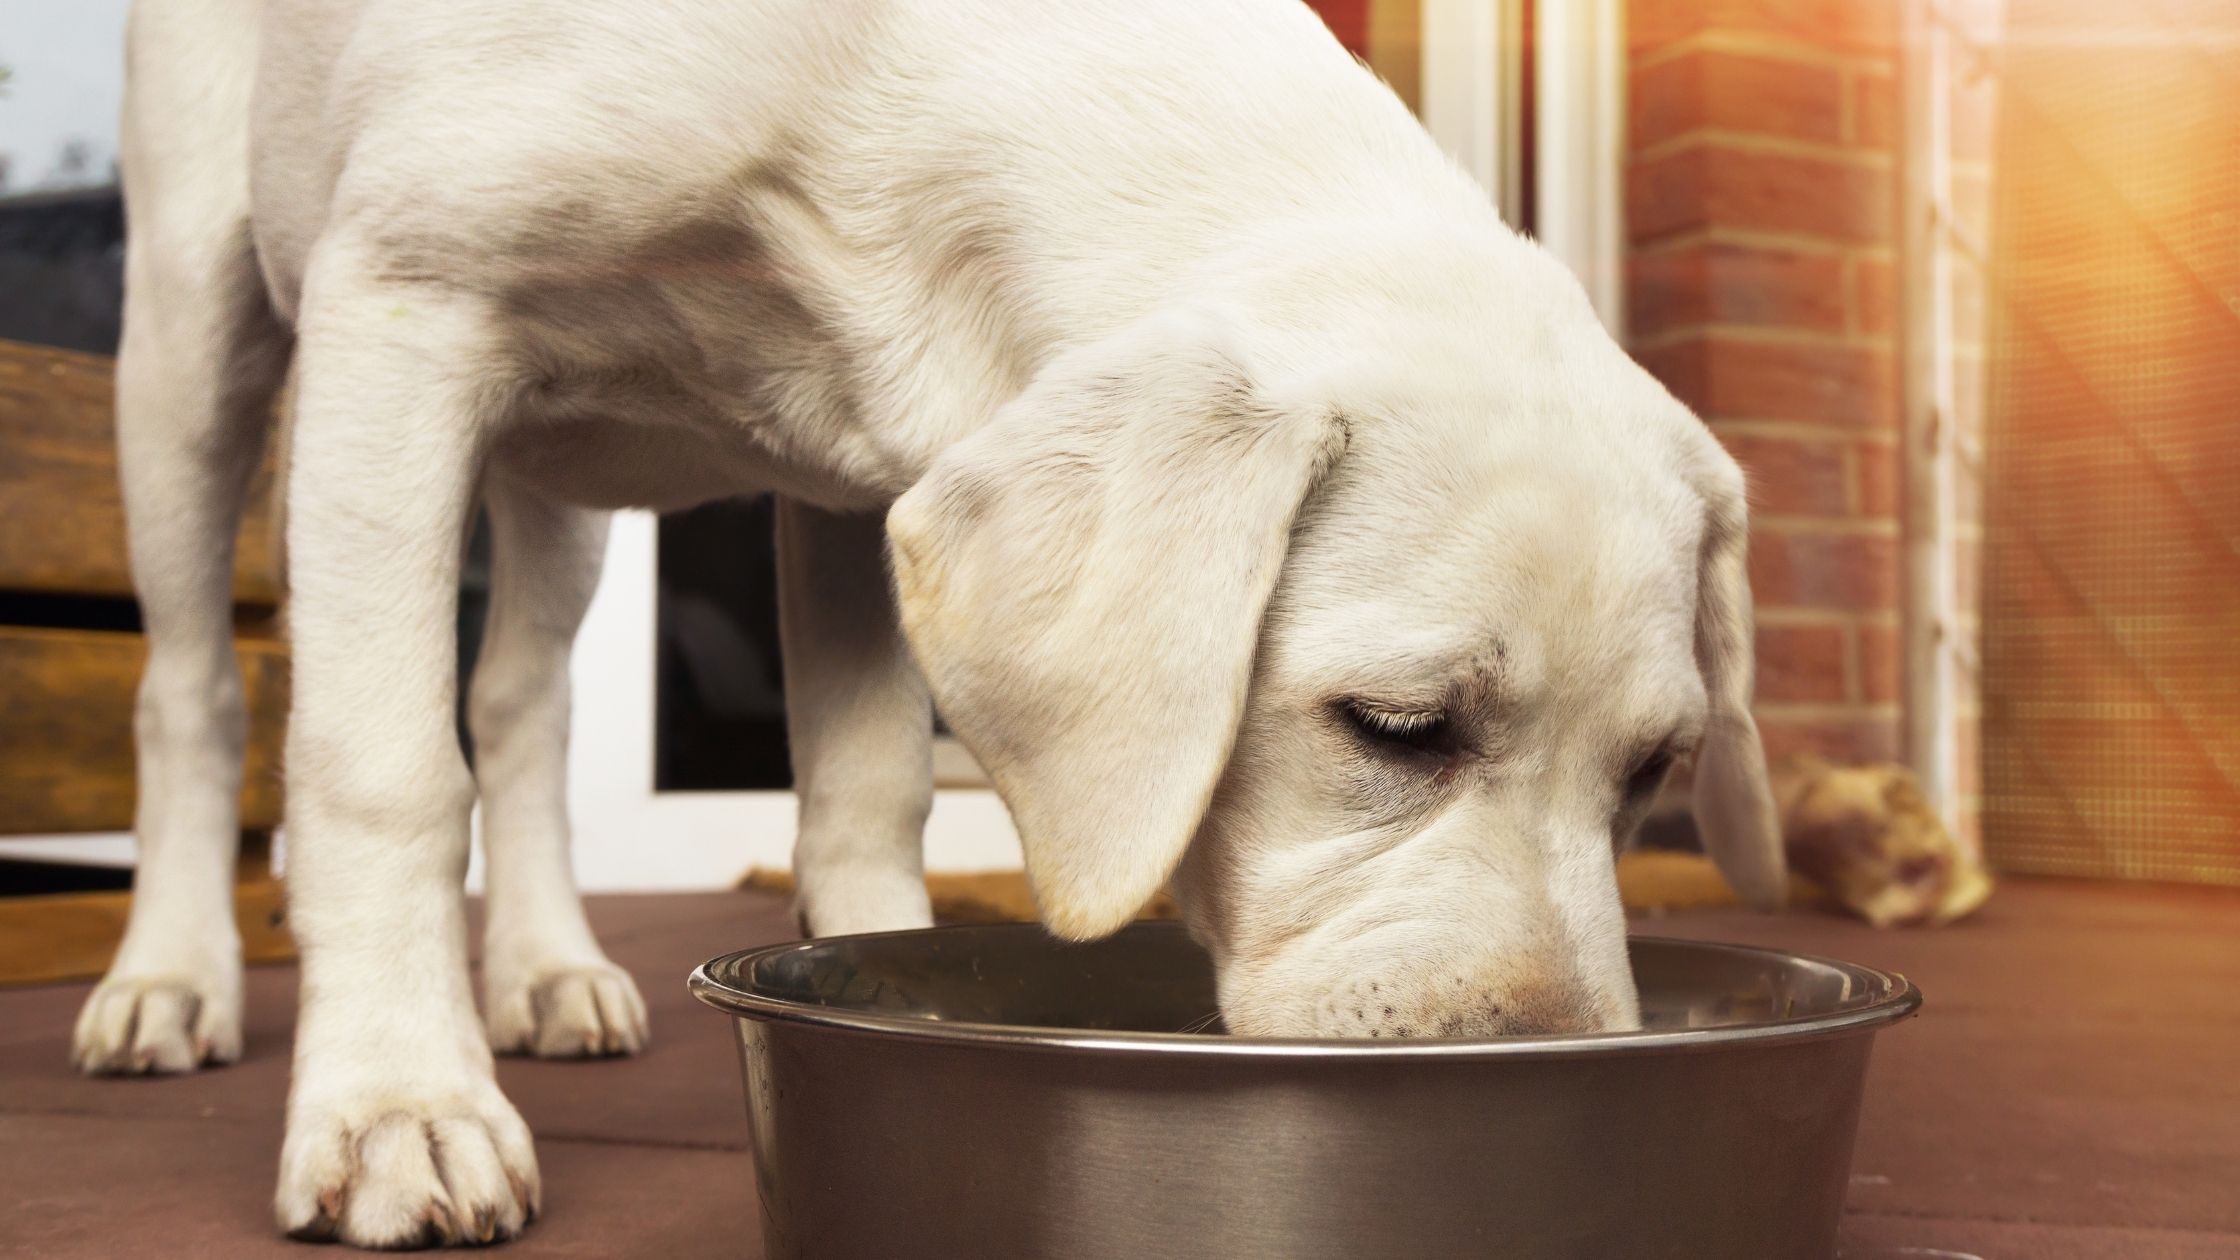 When financial hardship strikes, keeping food on the table can become a challenge. Learn about pet food pantries (and how you can help)!